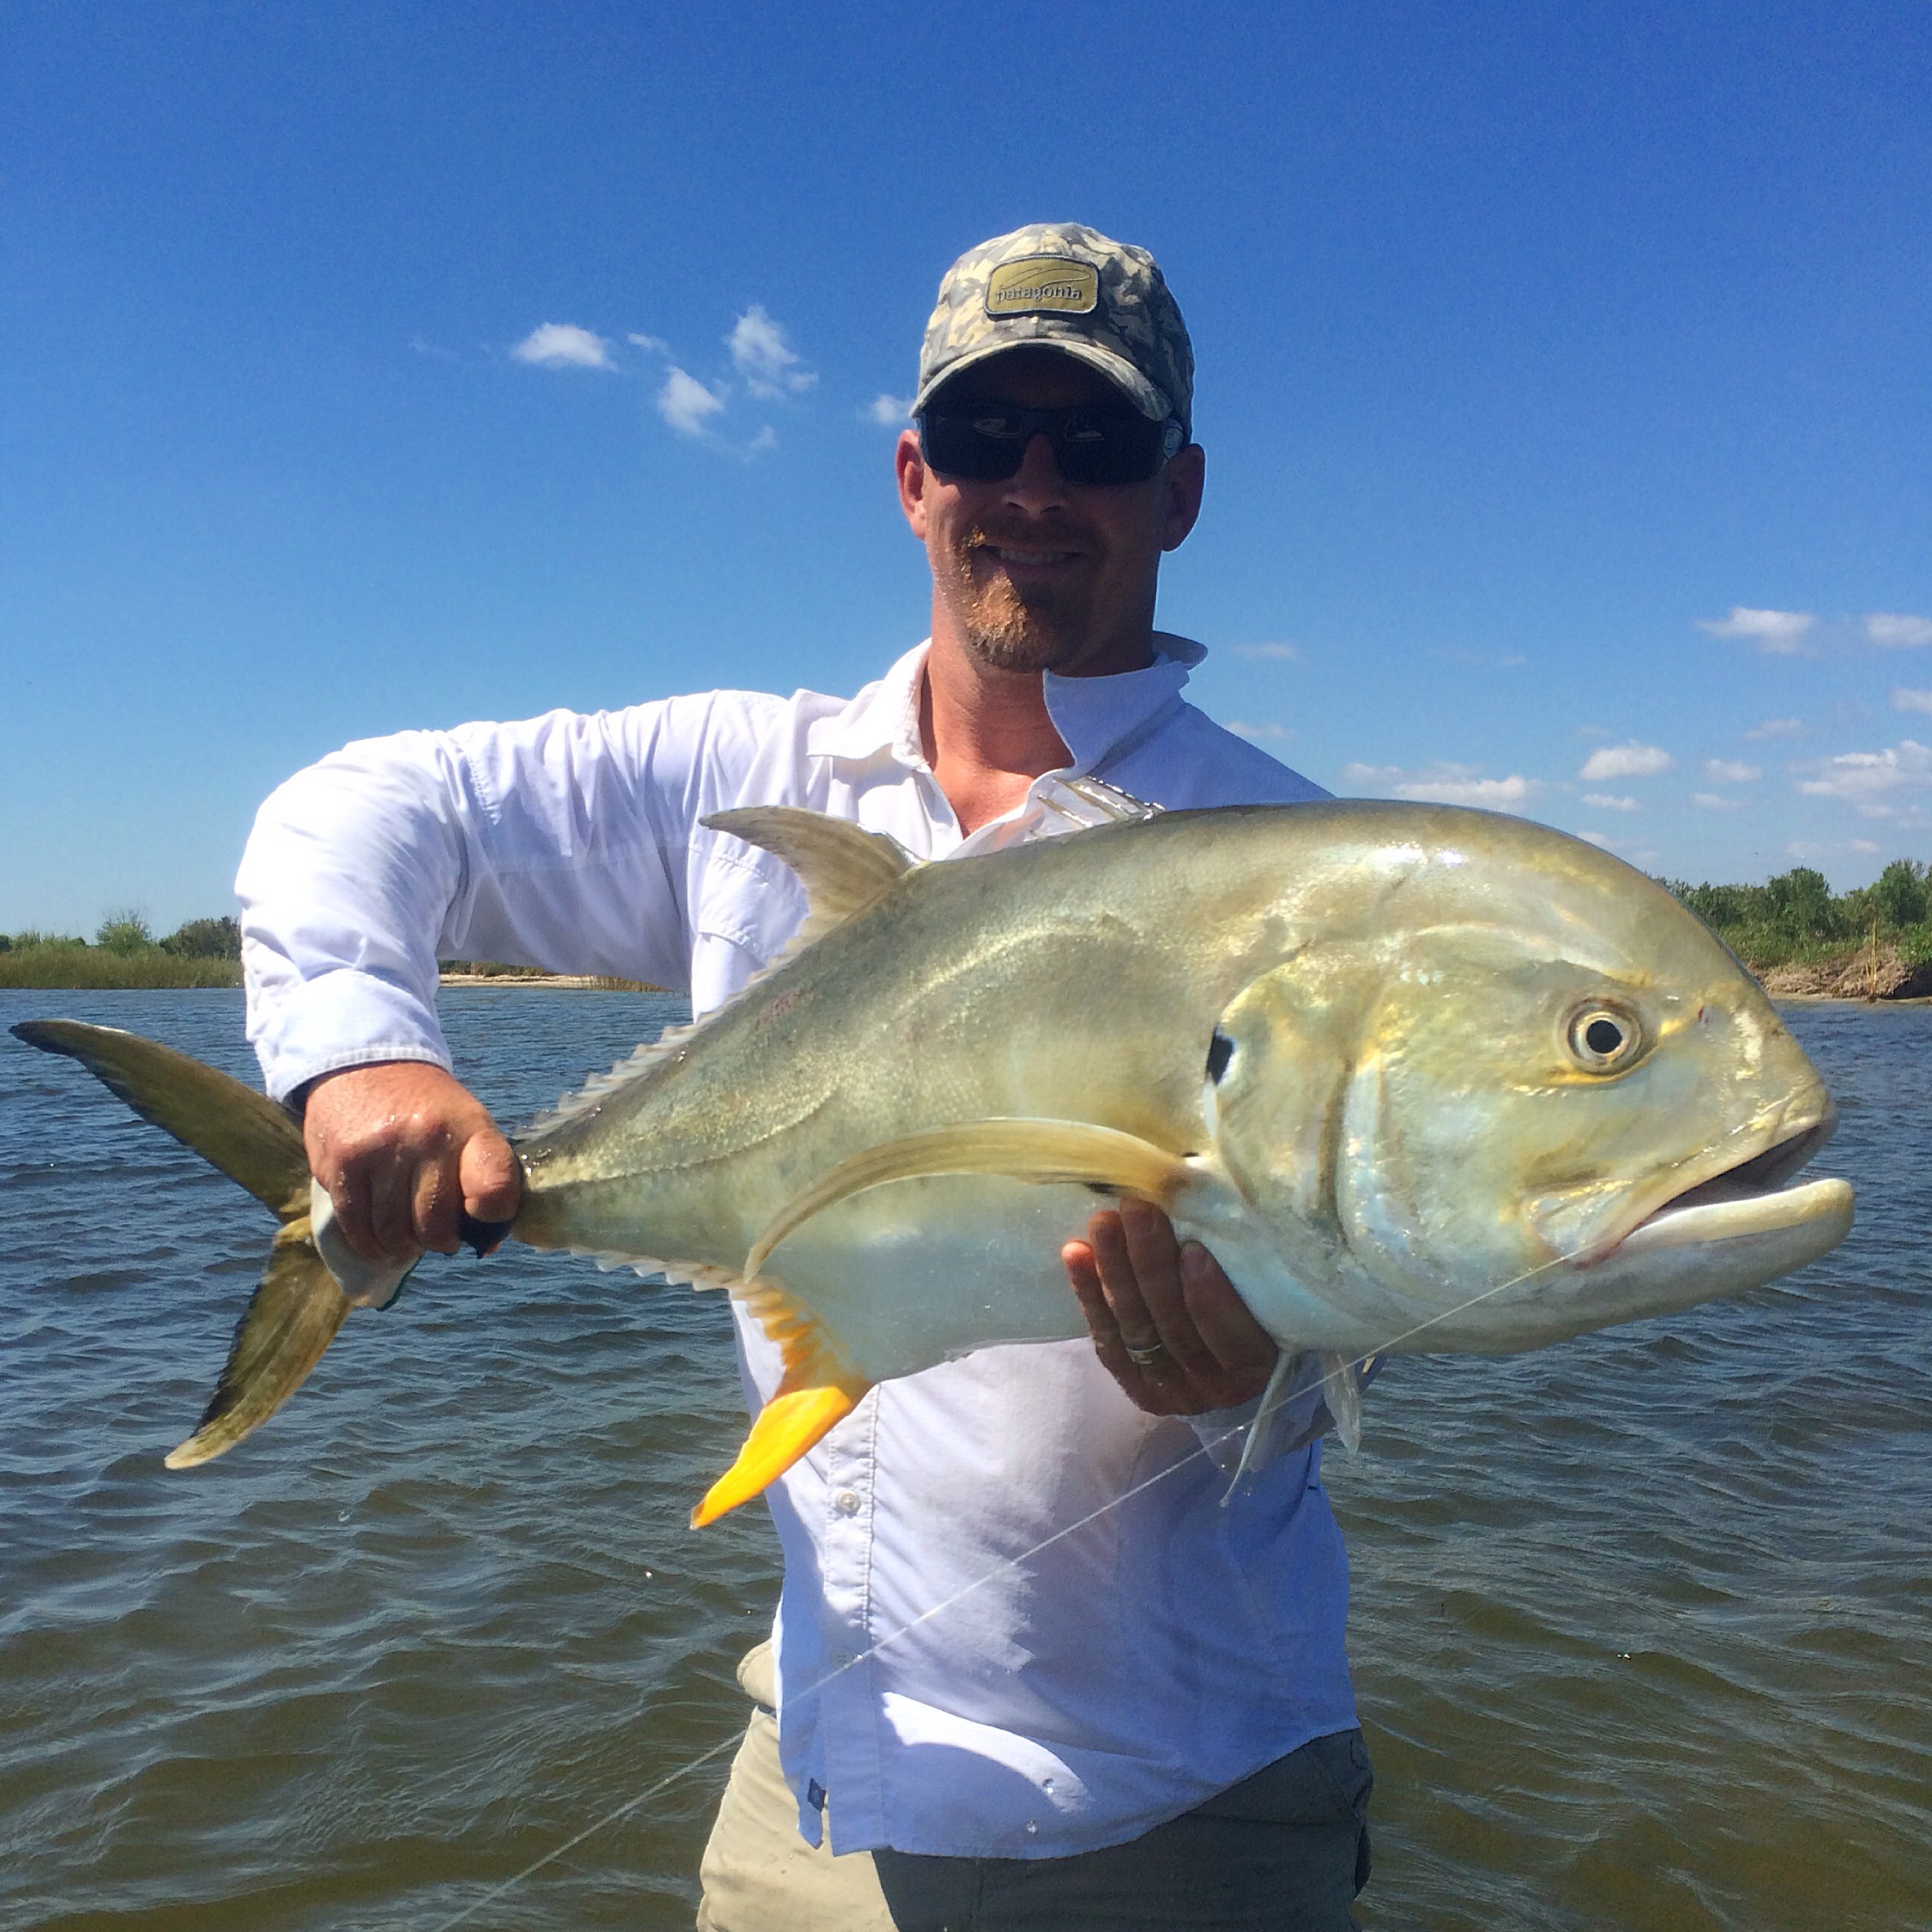 Fly fishing for Jack Crevalle in New Orleans’ backyard